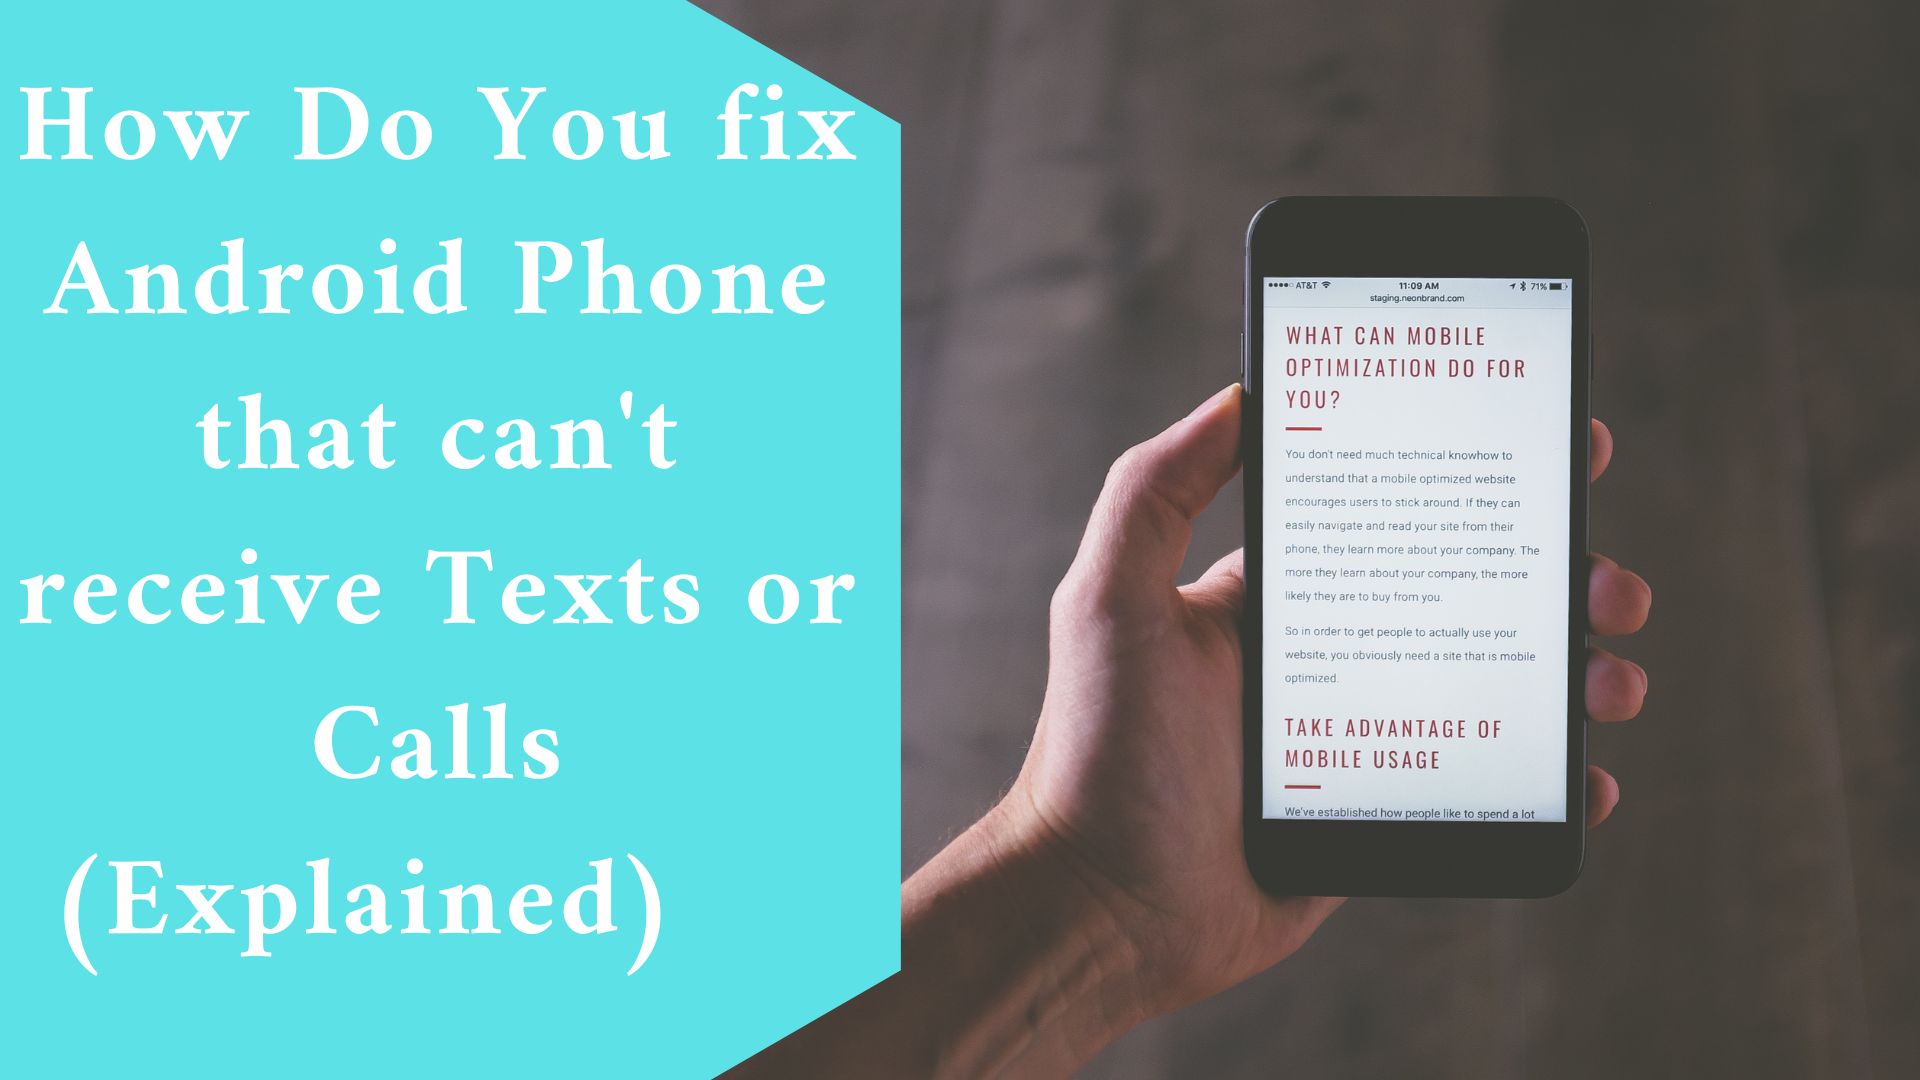 How Do You fix Android Phone that can't receive Texts or Calls (Explained)